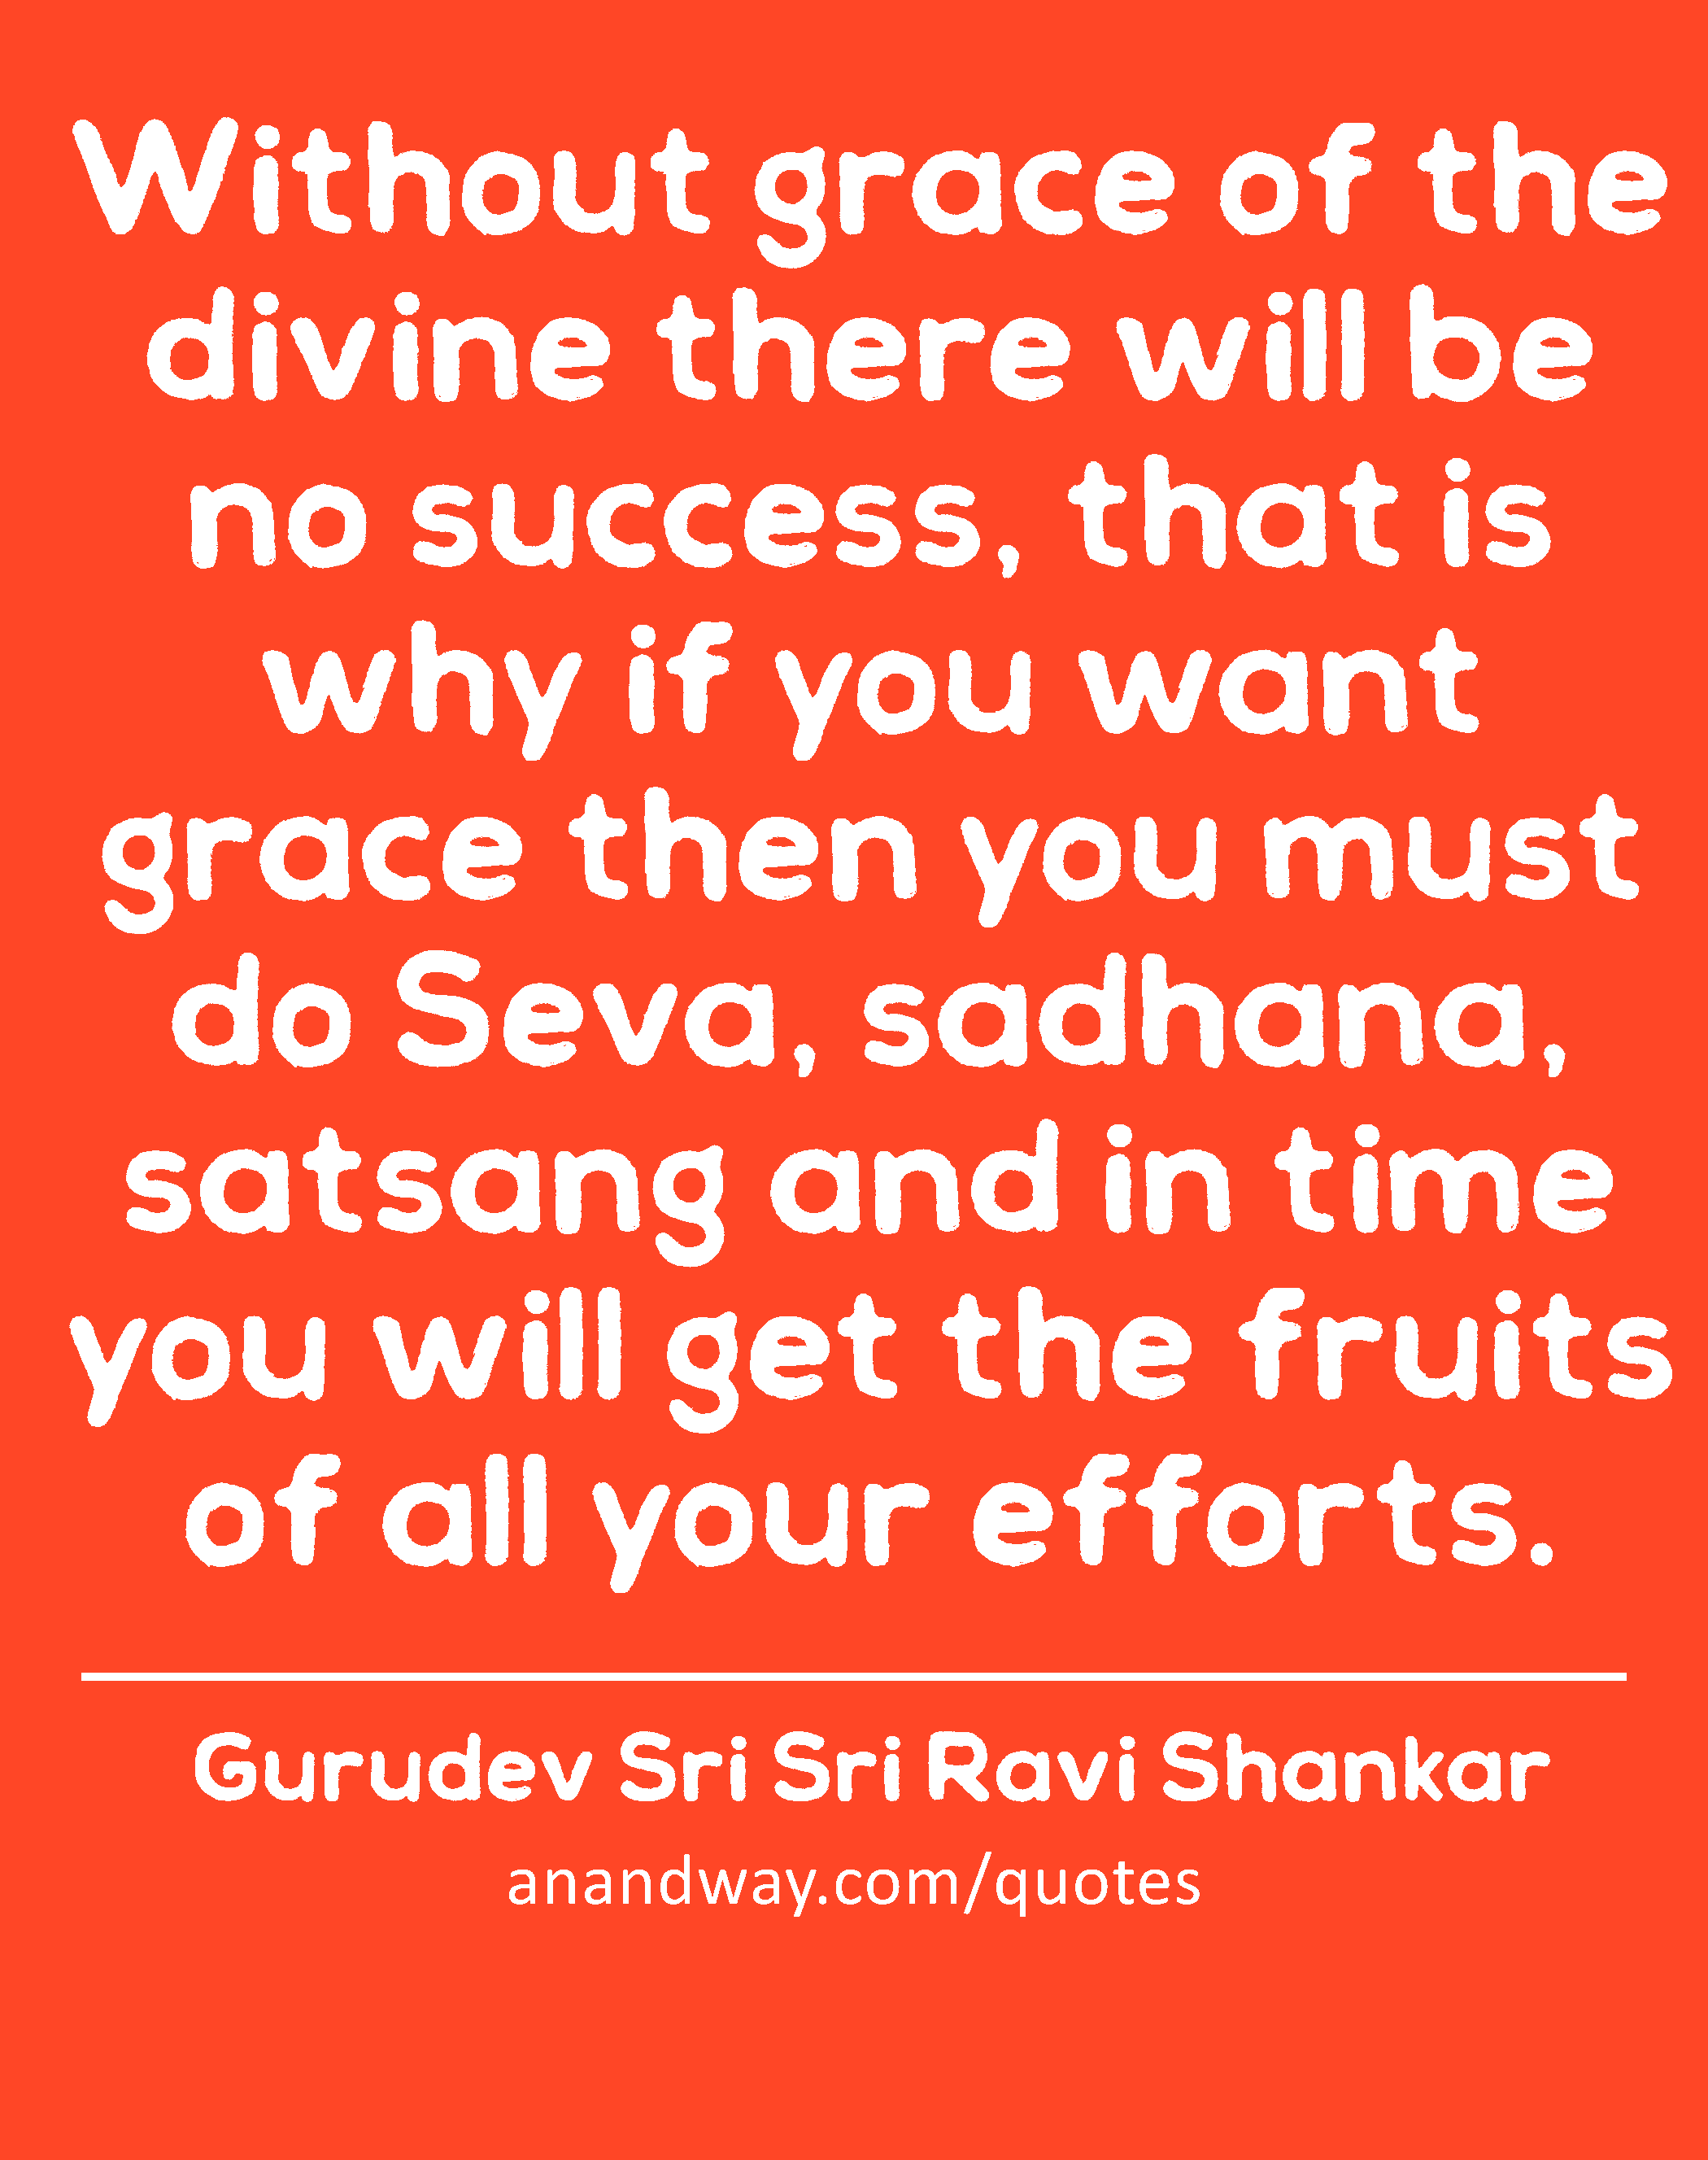 Without grace of the divine there will be no success, that is why if you want grace then you must
 -Gurudev Sri Sri Ravi Shankar